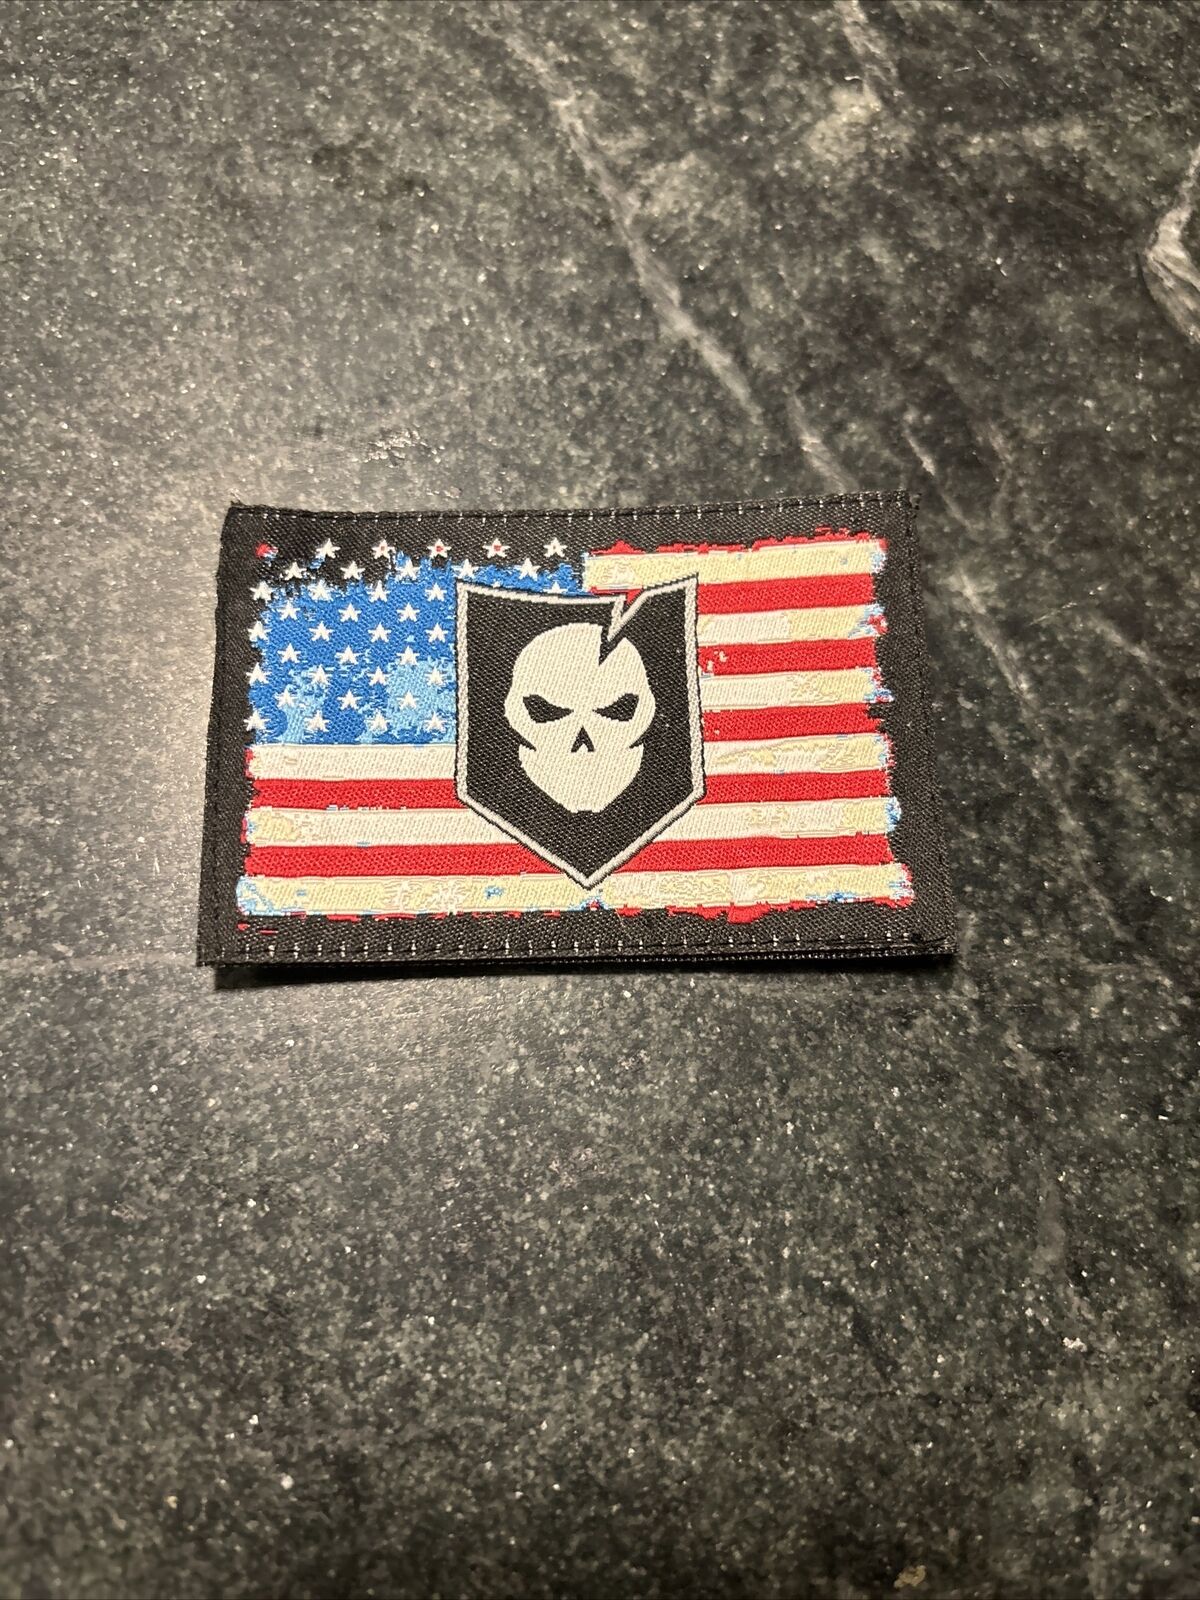 ITS Imminent Threat Solutions Morale Tactical USA HAT VELKRO PATCH RARE Skull